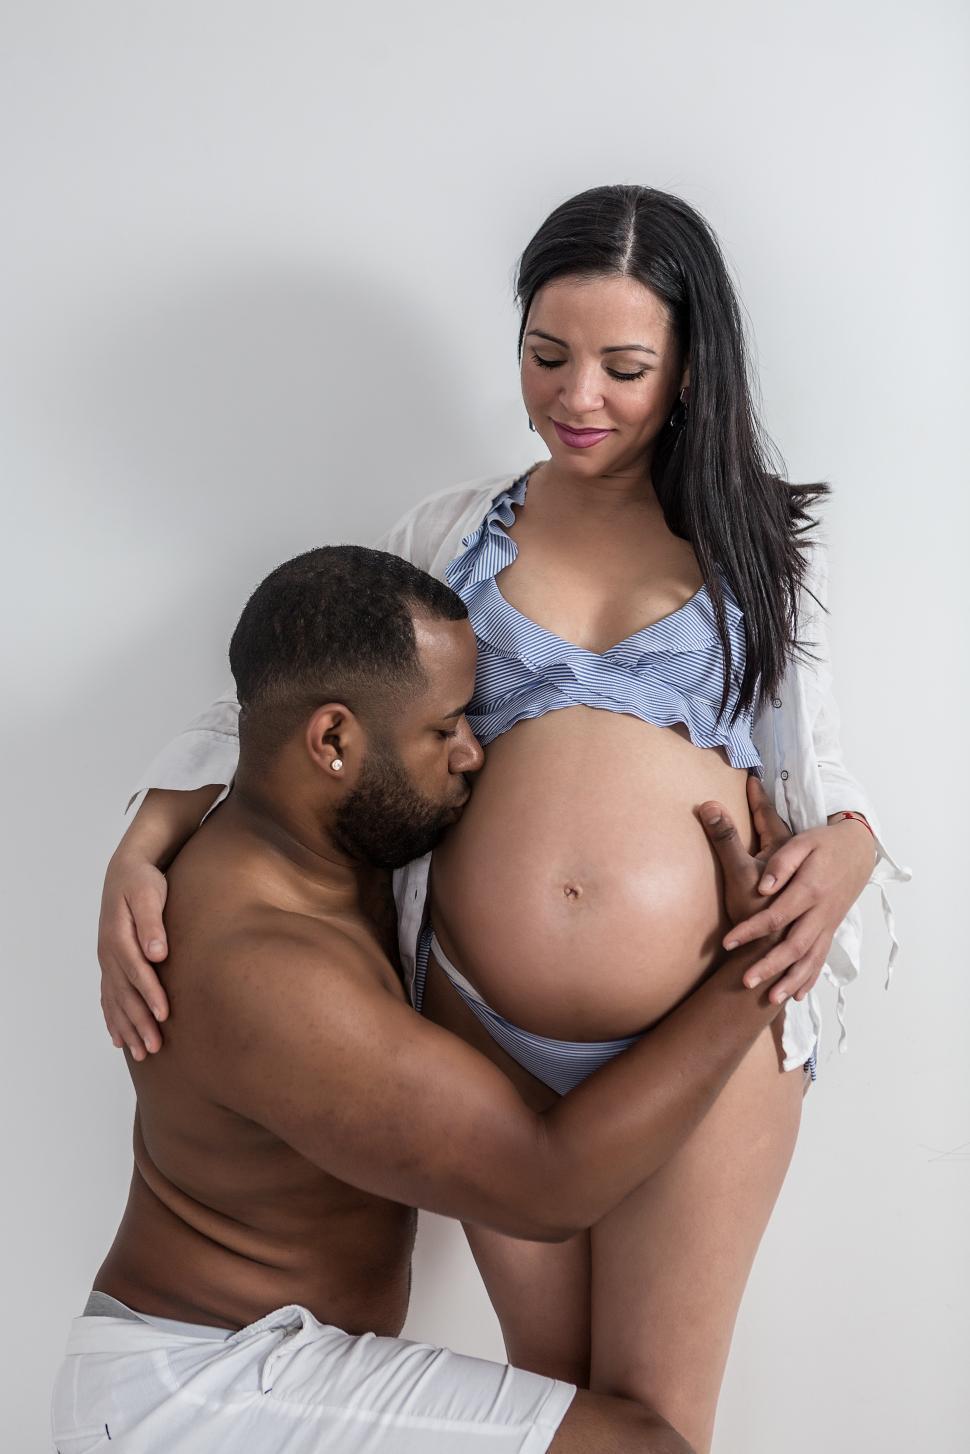 Free Image of Guy embracing and kissing pregnant lady belly 